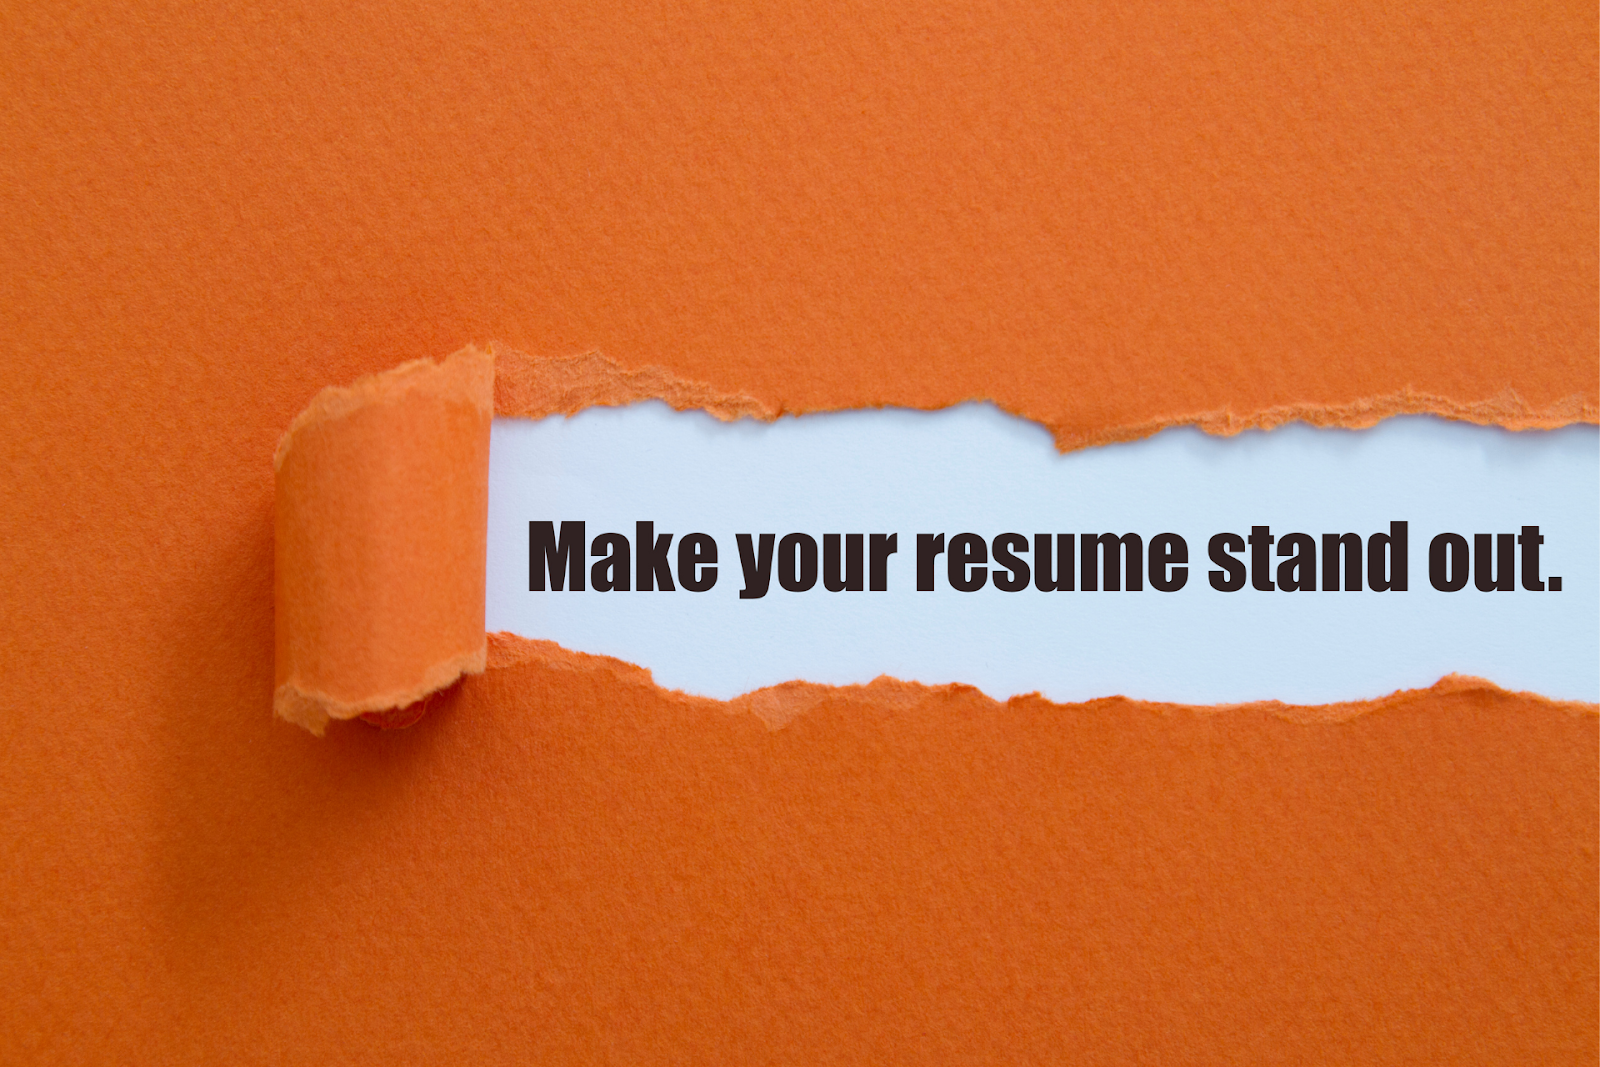 “Make your resume stand out” written on a piece of paper

